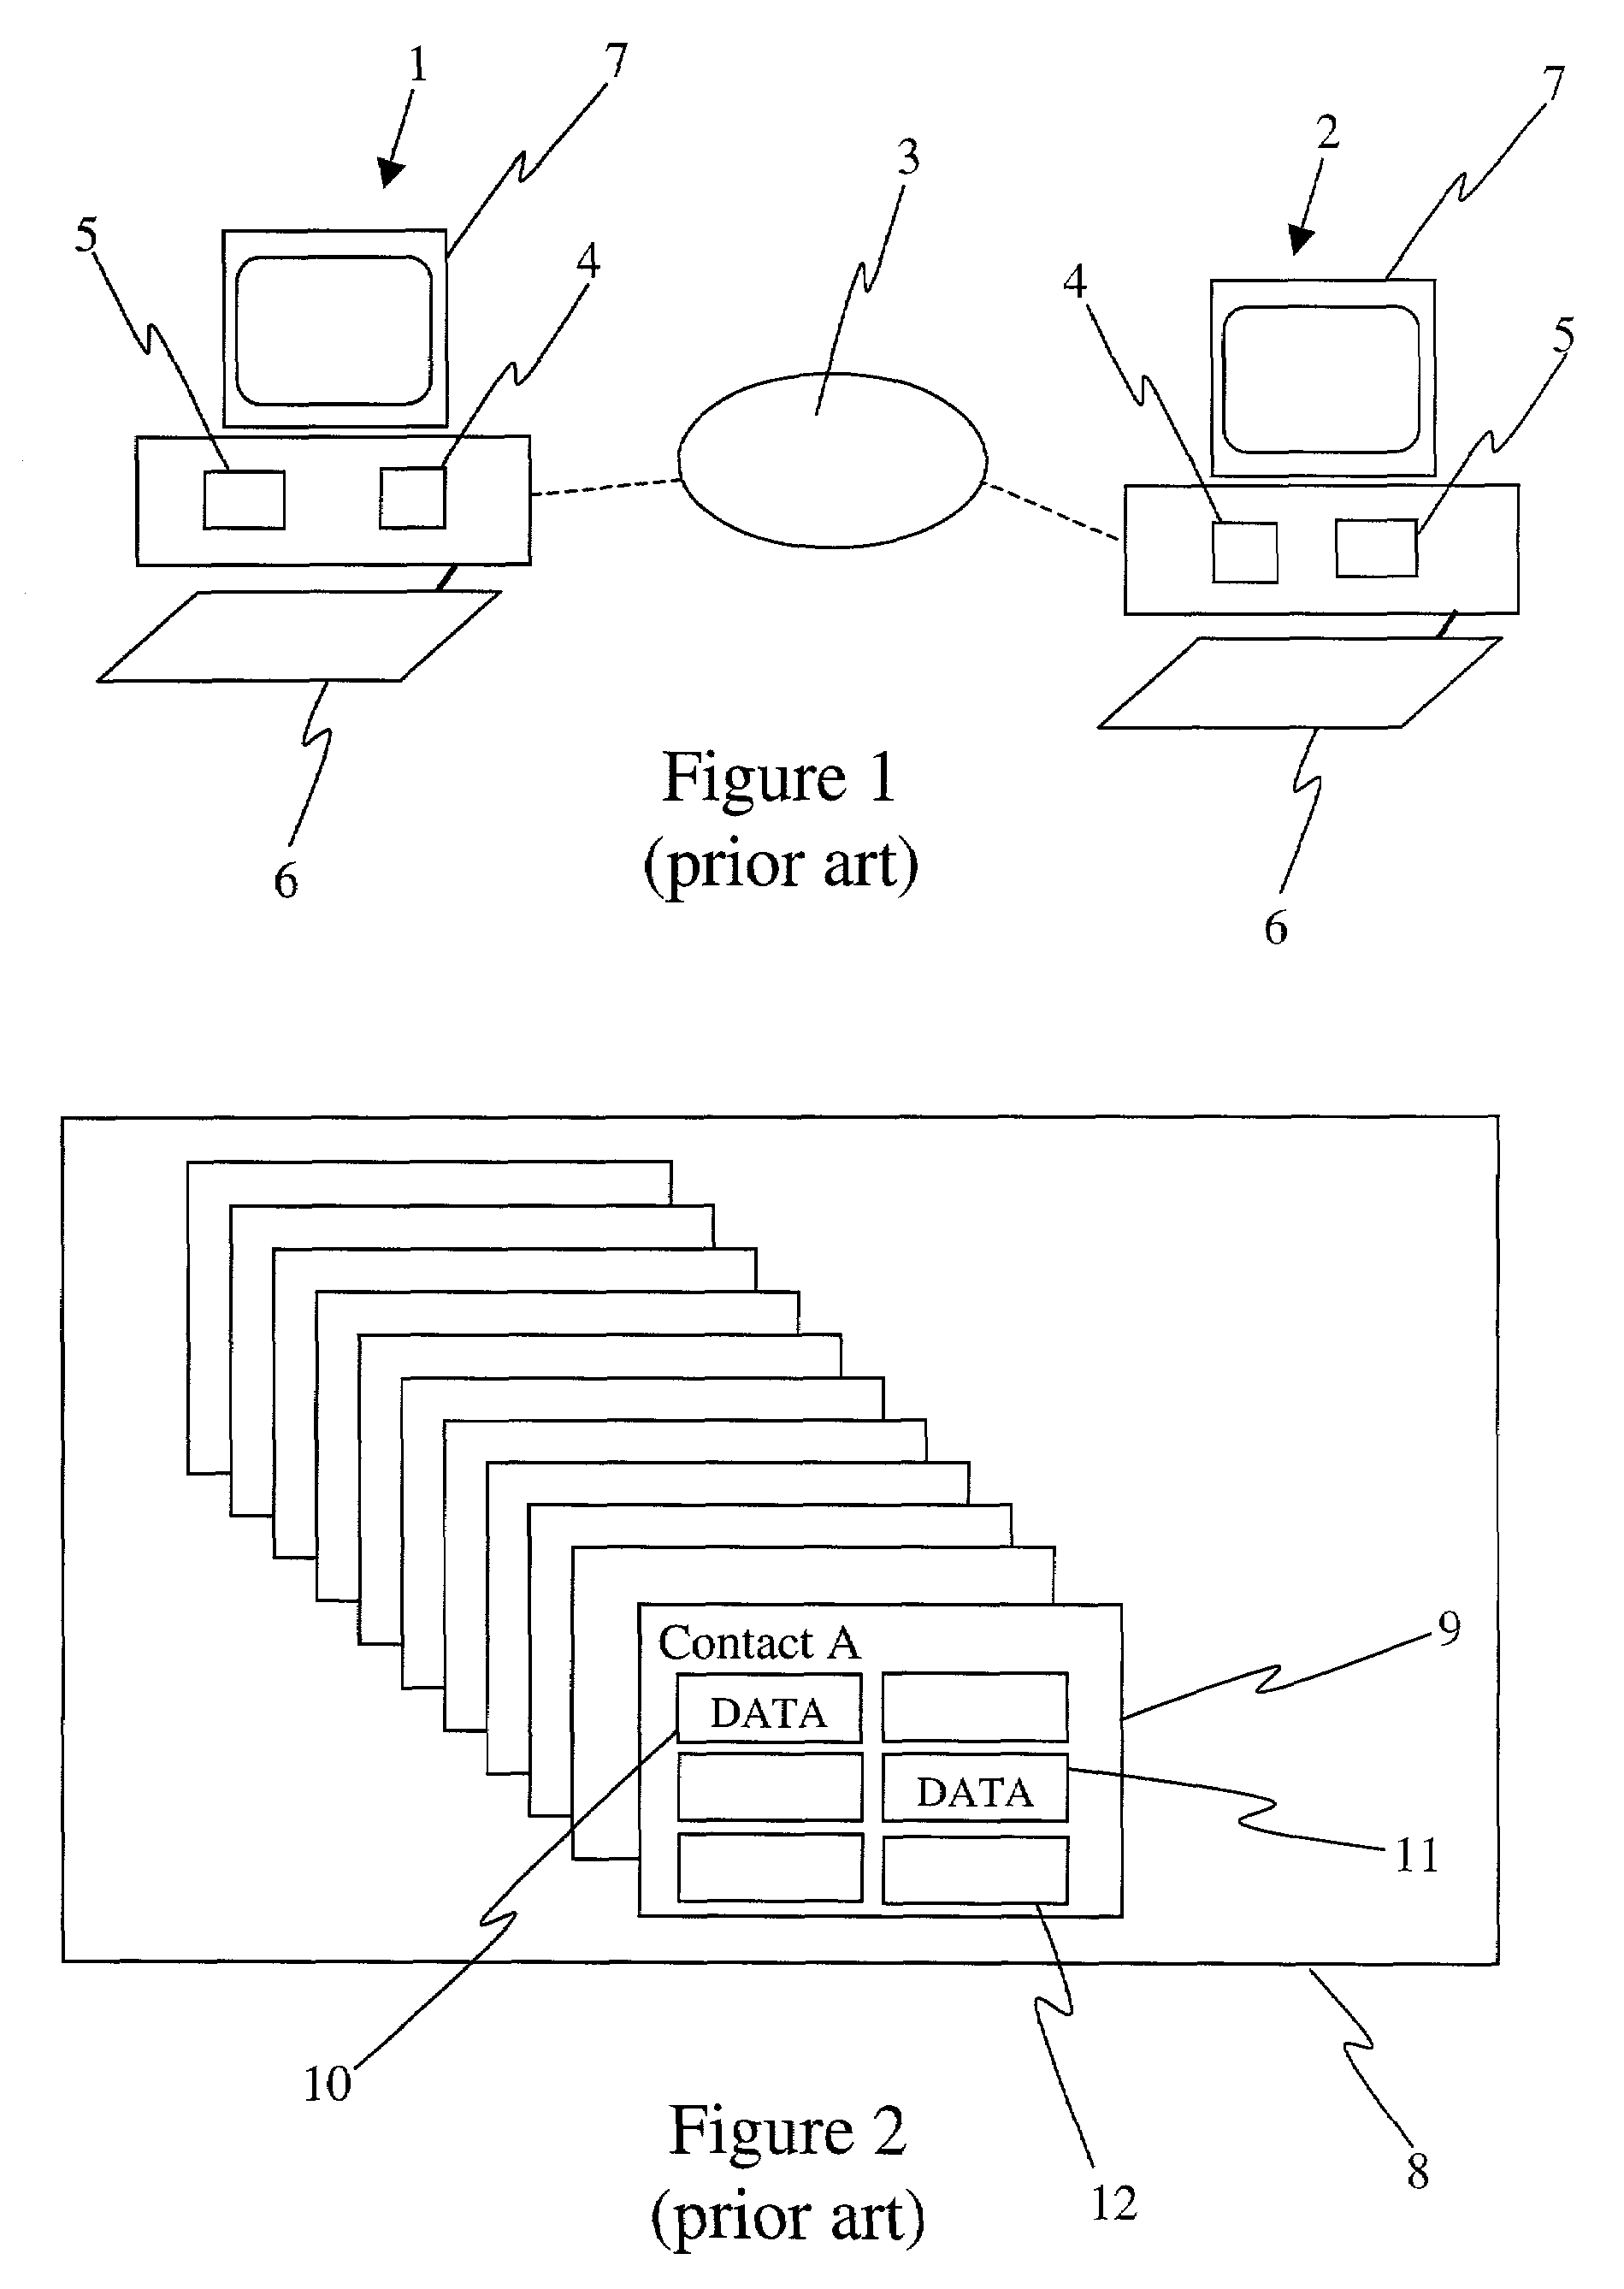 Method of automatically populating contact information fields for a new contract added to an electronic contact database